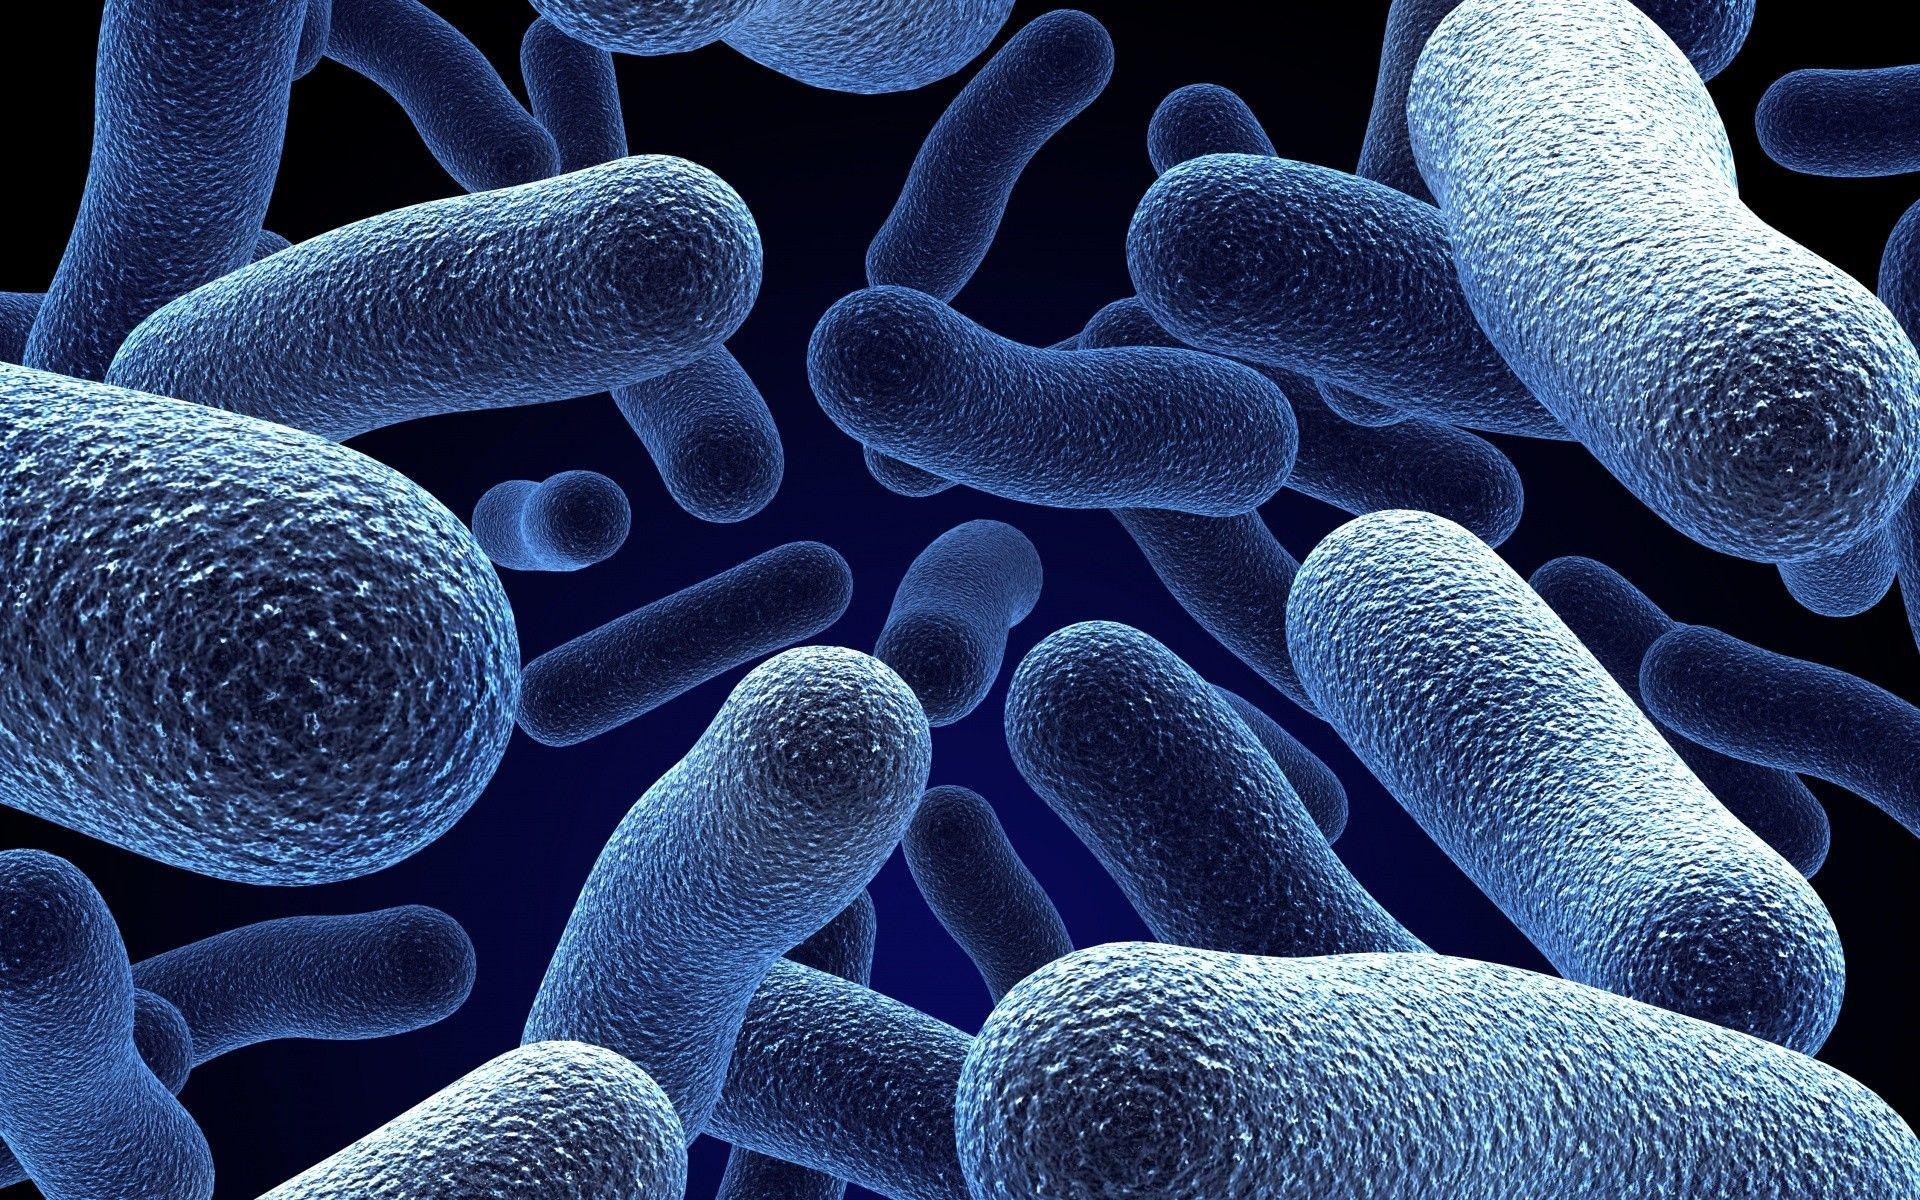 Microorganisms 3D. Android wallpaper for free